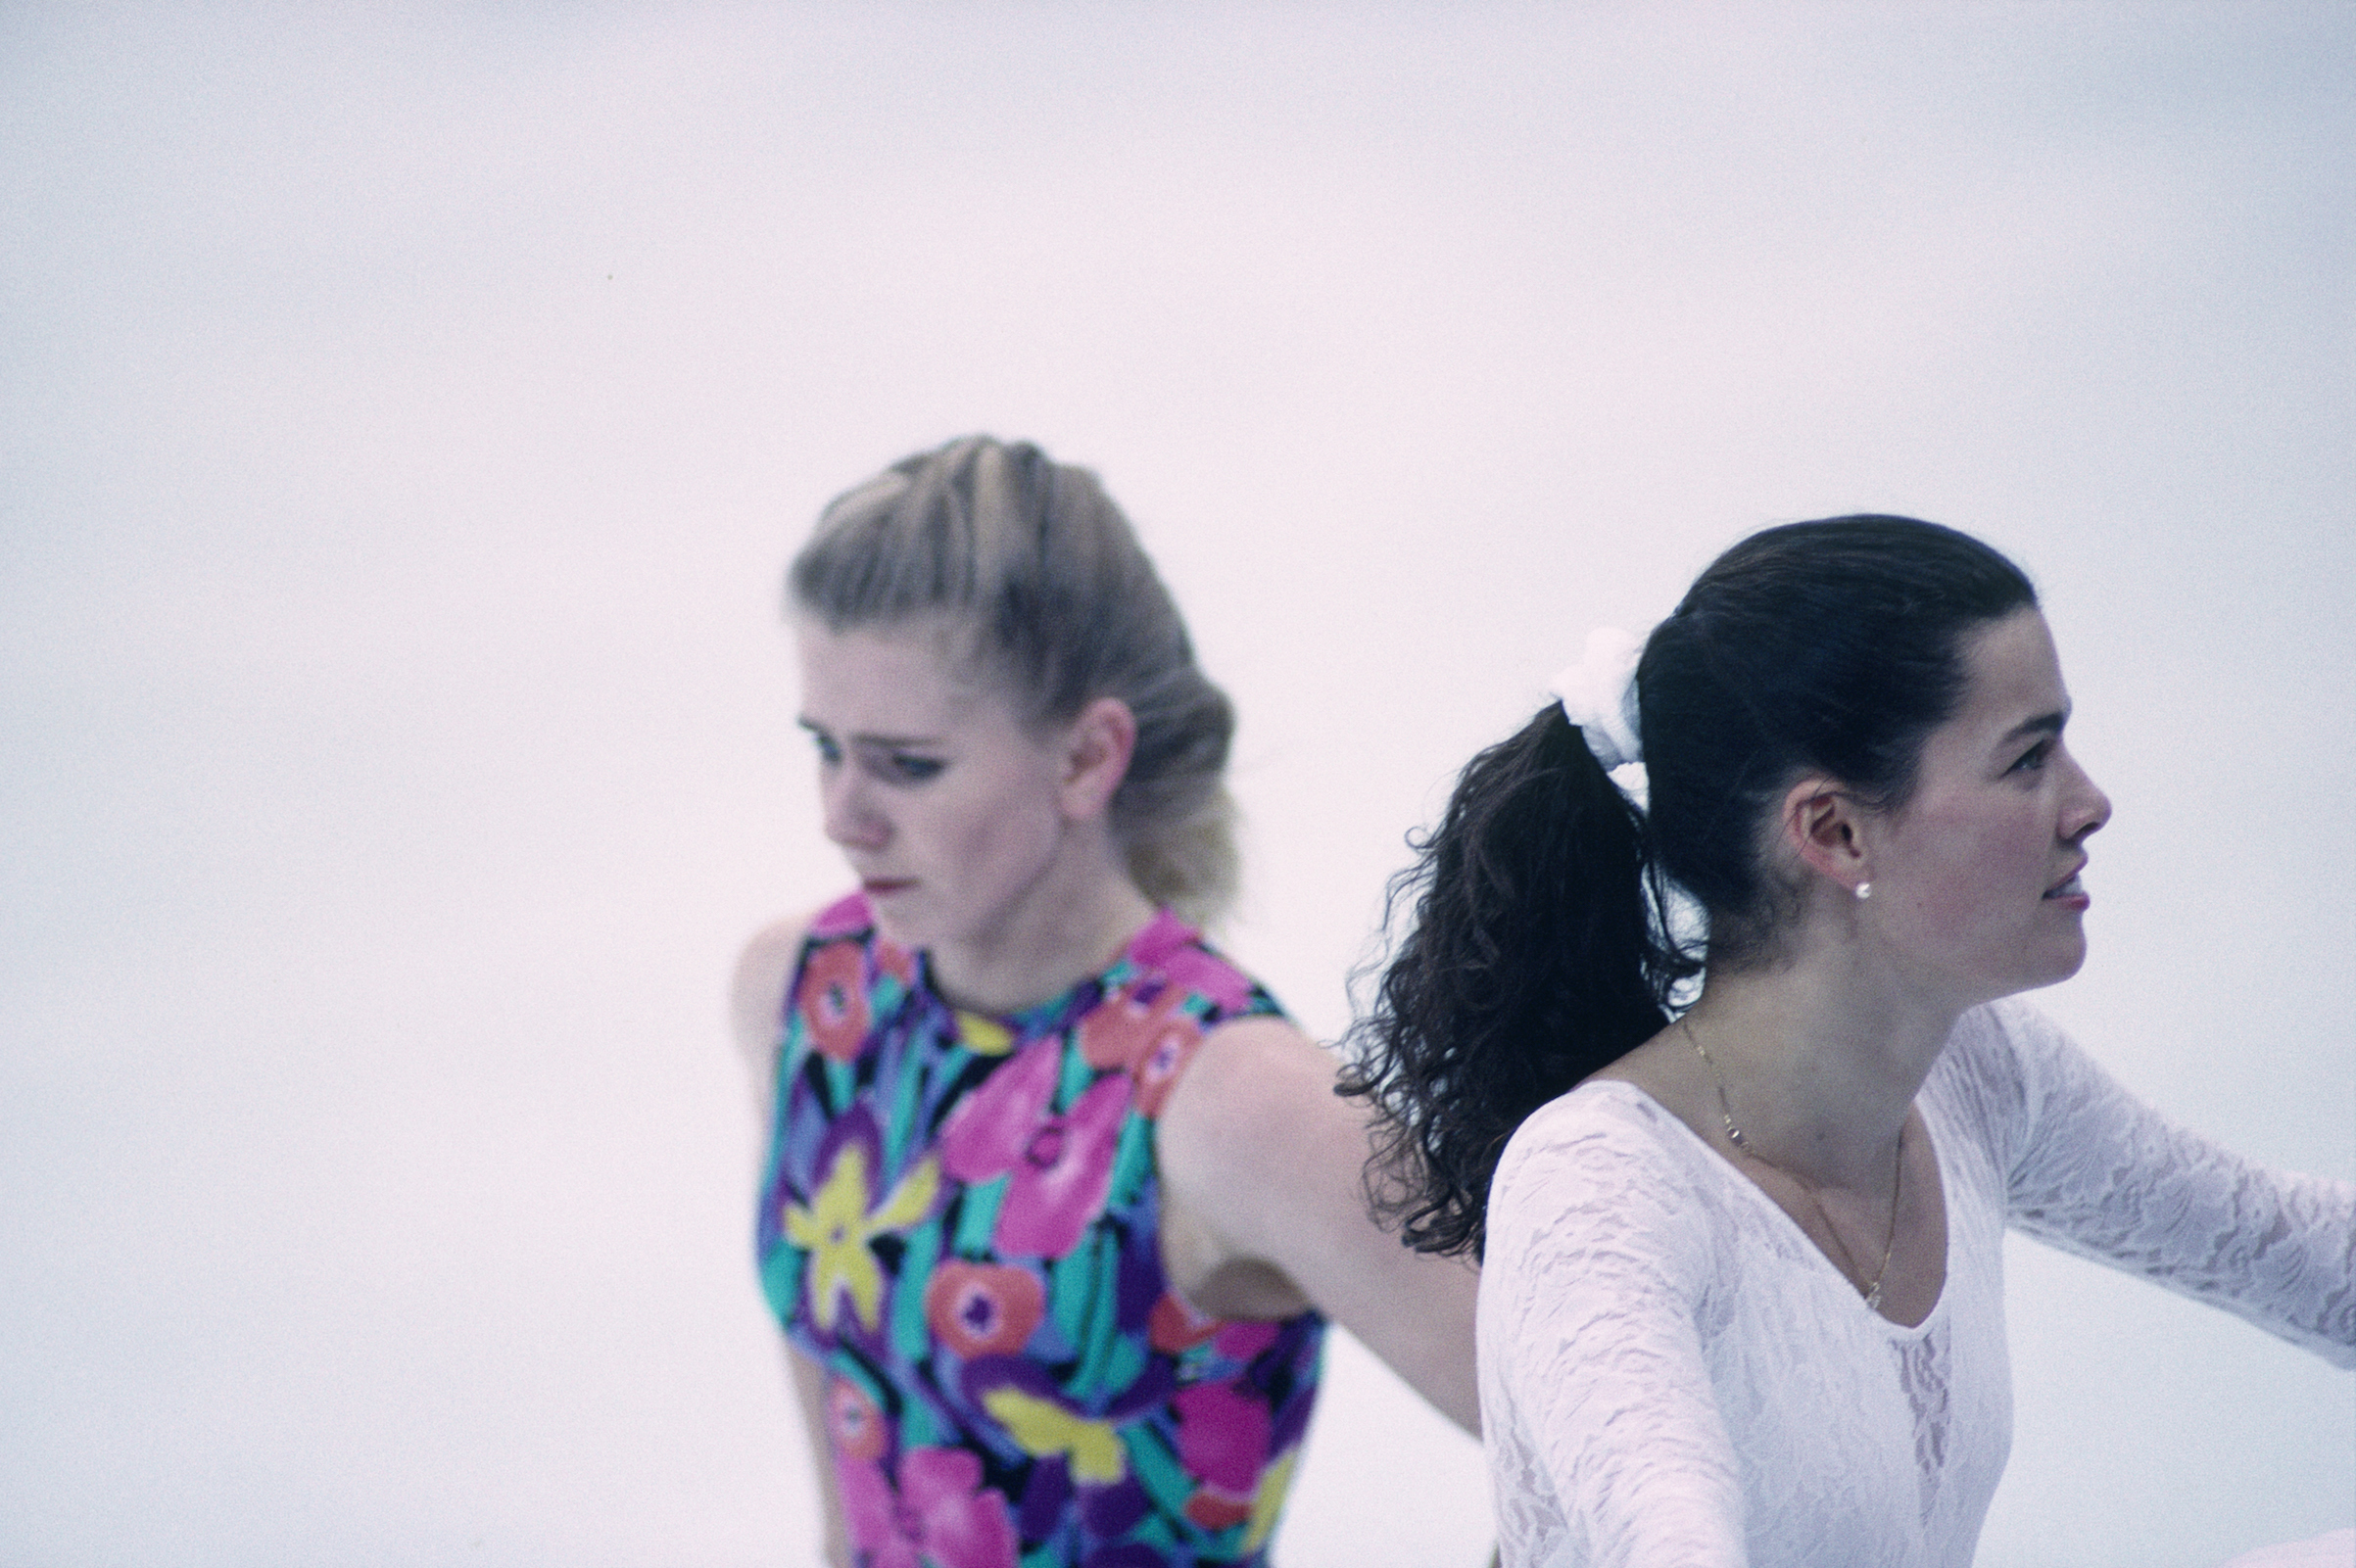 Tonya Harding (L) and Nancy Kerrigan, both from USA, during a training session of the 1994 Winter Olympics. (Dimitri Iundt—Corbis/VCG/Getty Images)